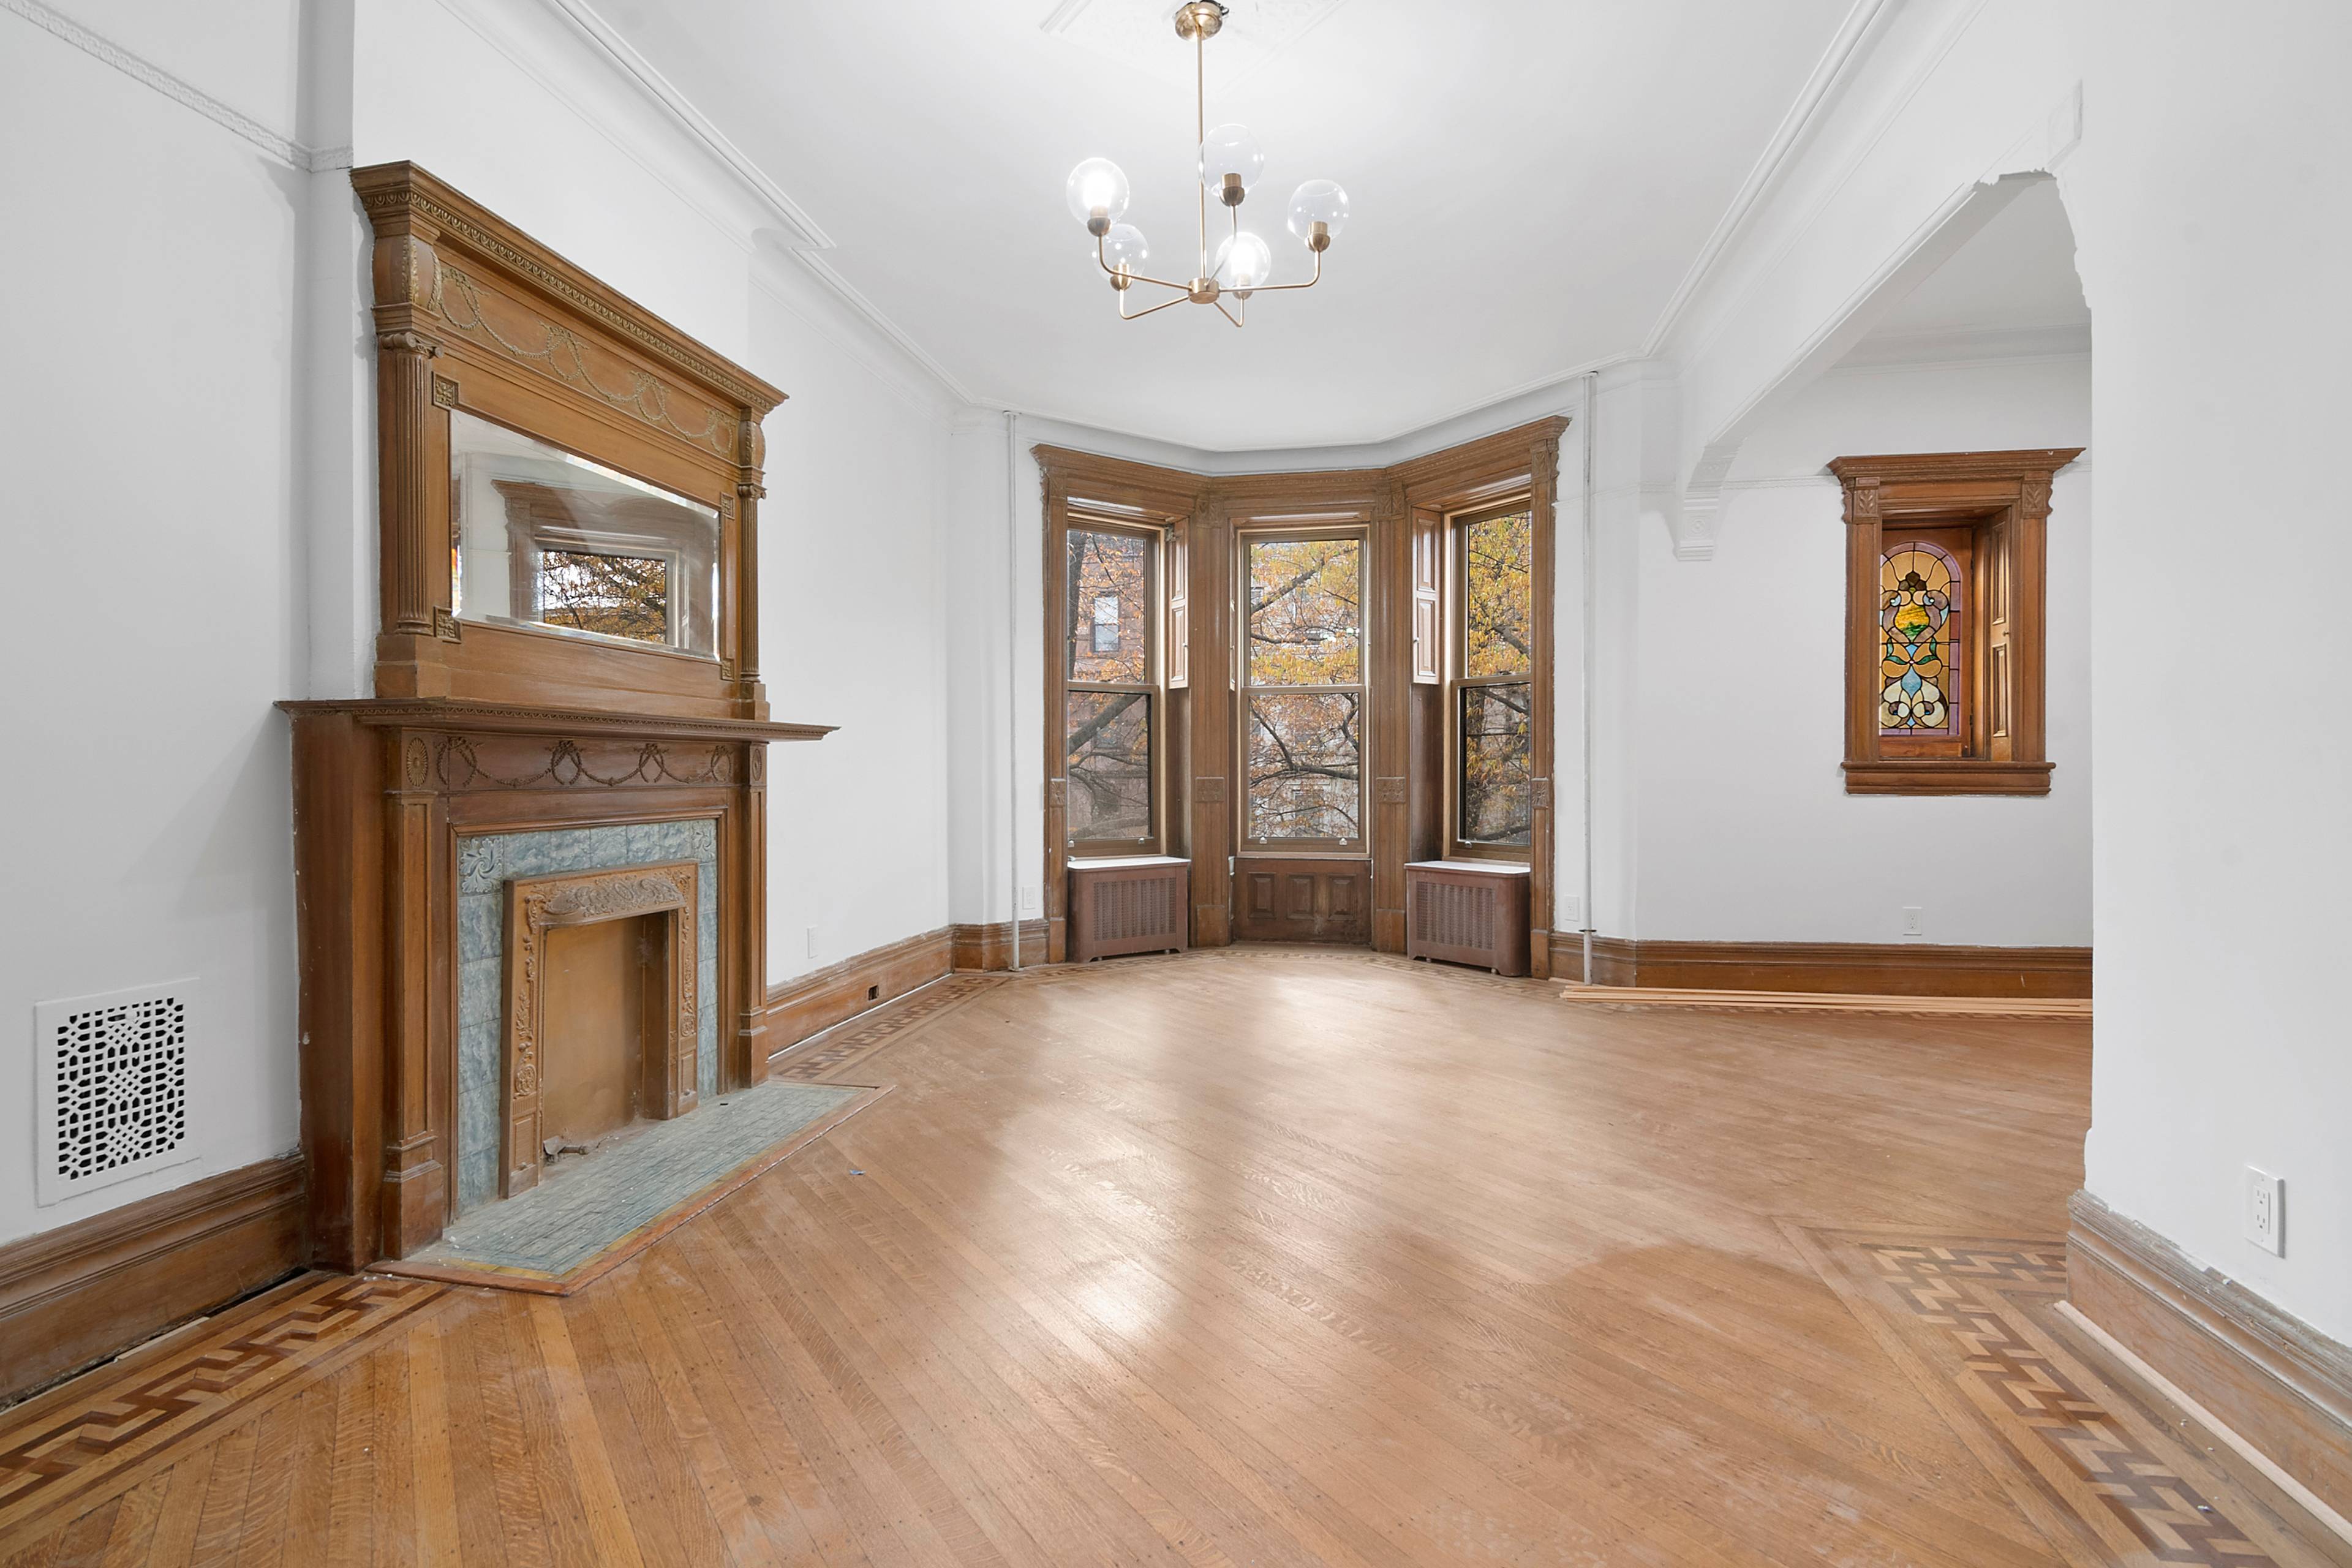 Located on one of the most Gorgeous Blocks in Historic Stuyvesant Heights, you'll love this treelined street full of small and well maintained Brownstone homes.